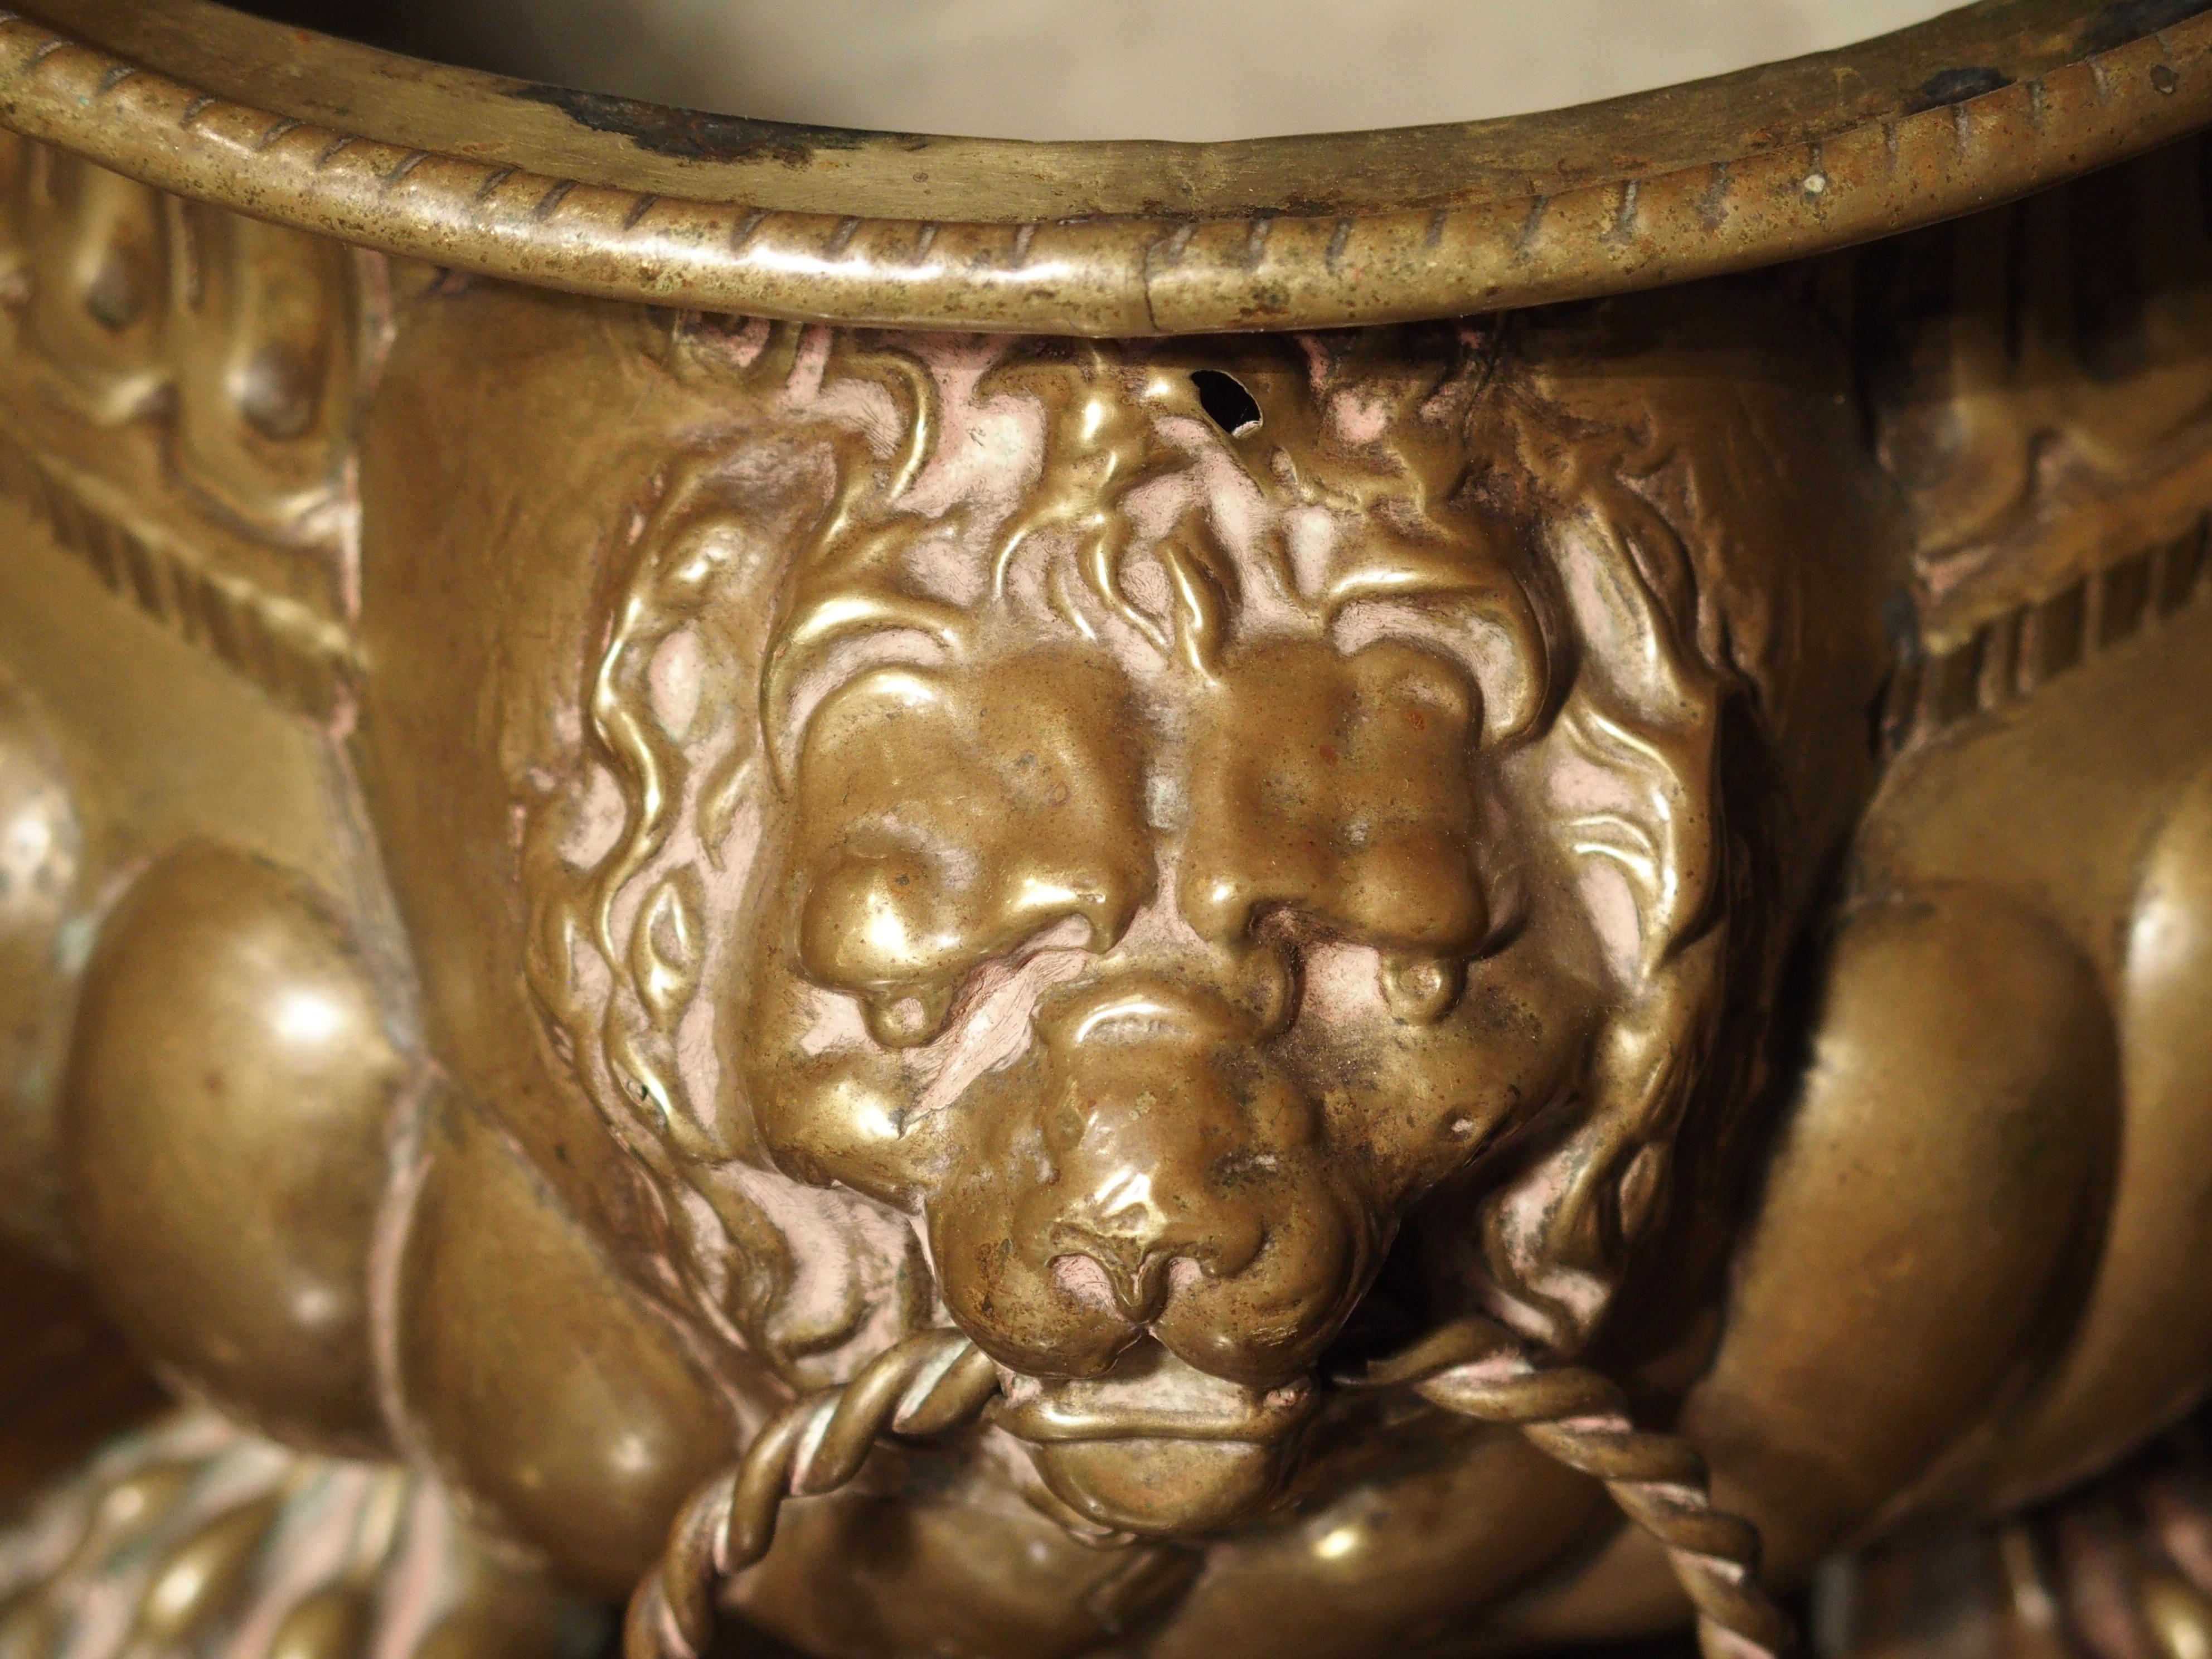 This large antique oval brass jardinière from France has wonderful lion heads motifs with rings in their mouths for the handles. The sides have gadrooned lobes under a band of linear scoop motifs. All this rests upon four lion’s paw motifs. Perfect